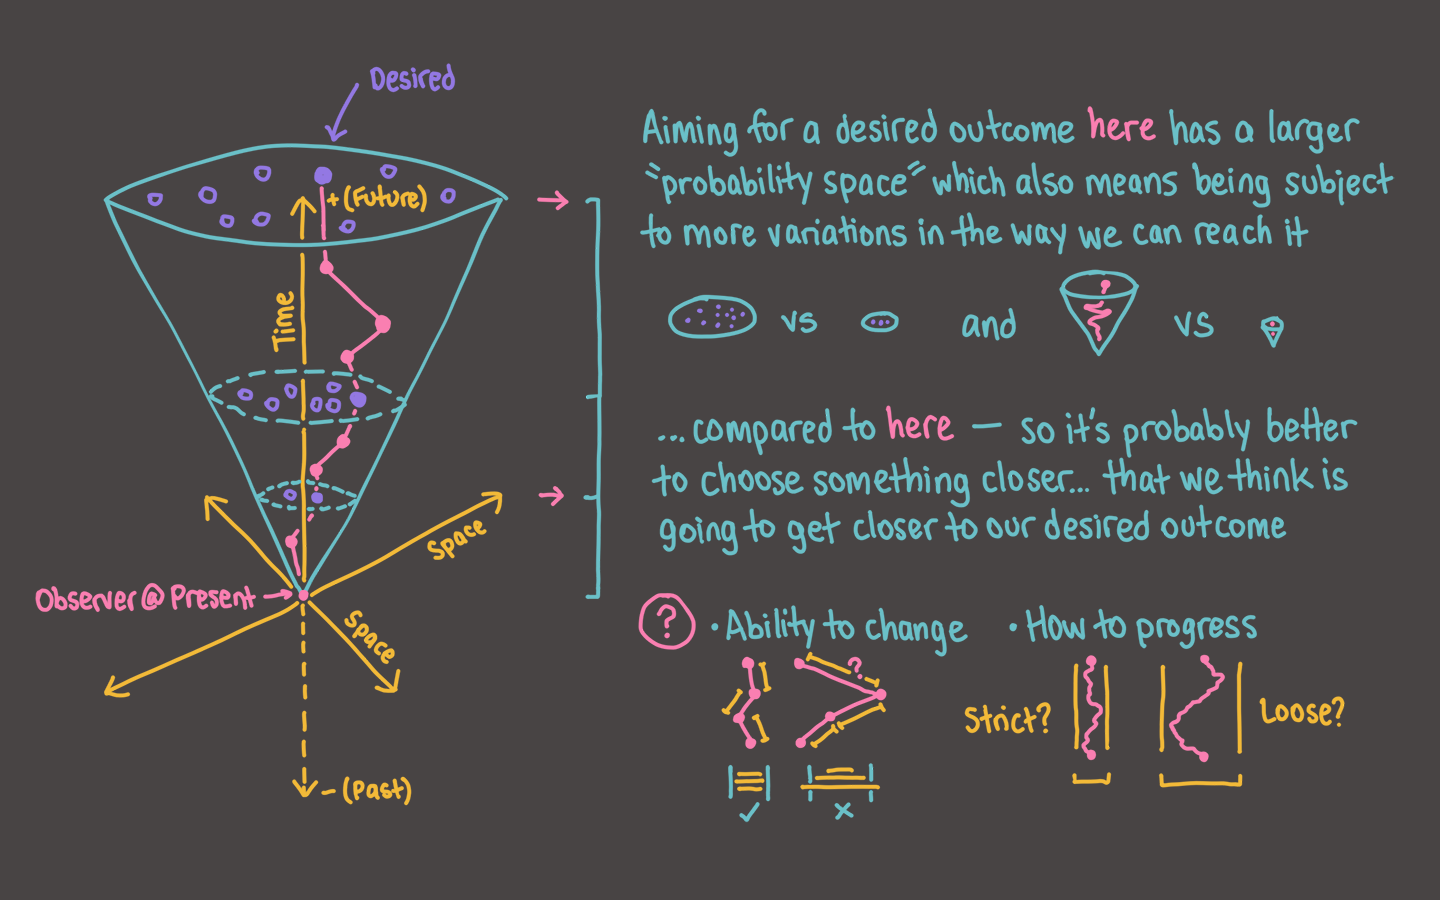 The light cone concept, illustrated; selecting an outcome further out from the point of the cone (the present) means greater surface area (probability space) and possibilities in the path to get there. Perhaps a better idea is to select something closer as a step in getting to our eventual desired outcome.